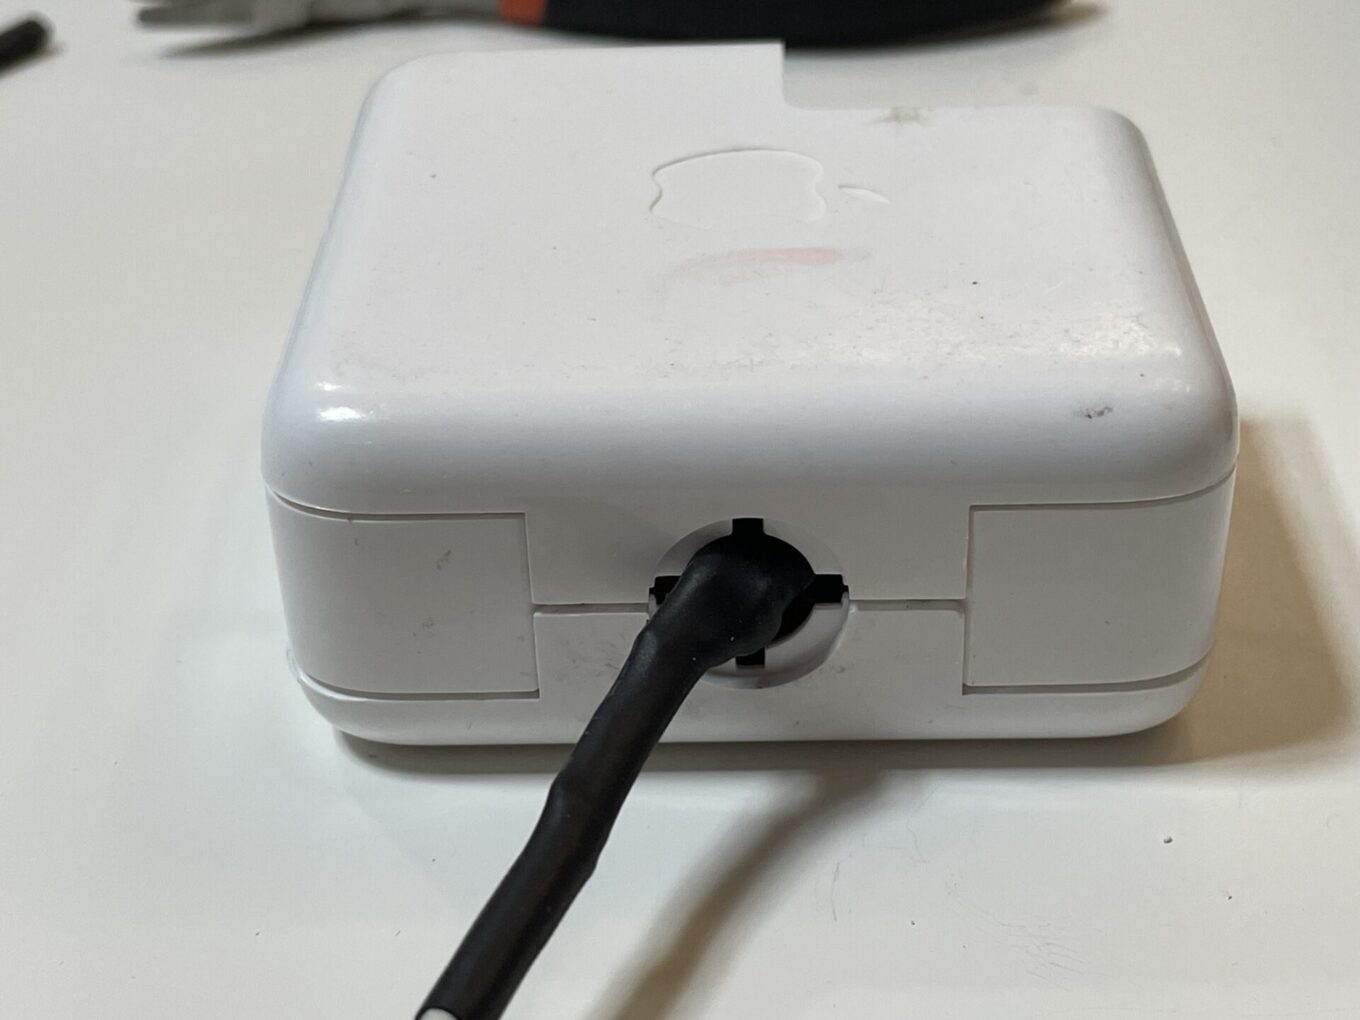 Go back to the Magsafe4 charger